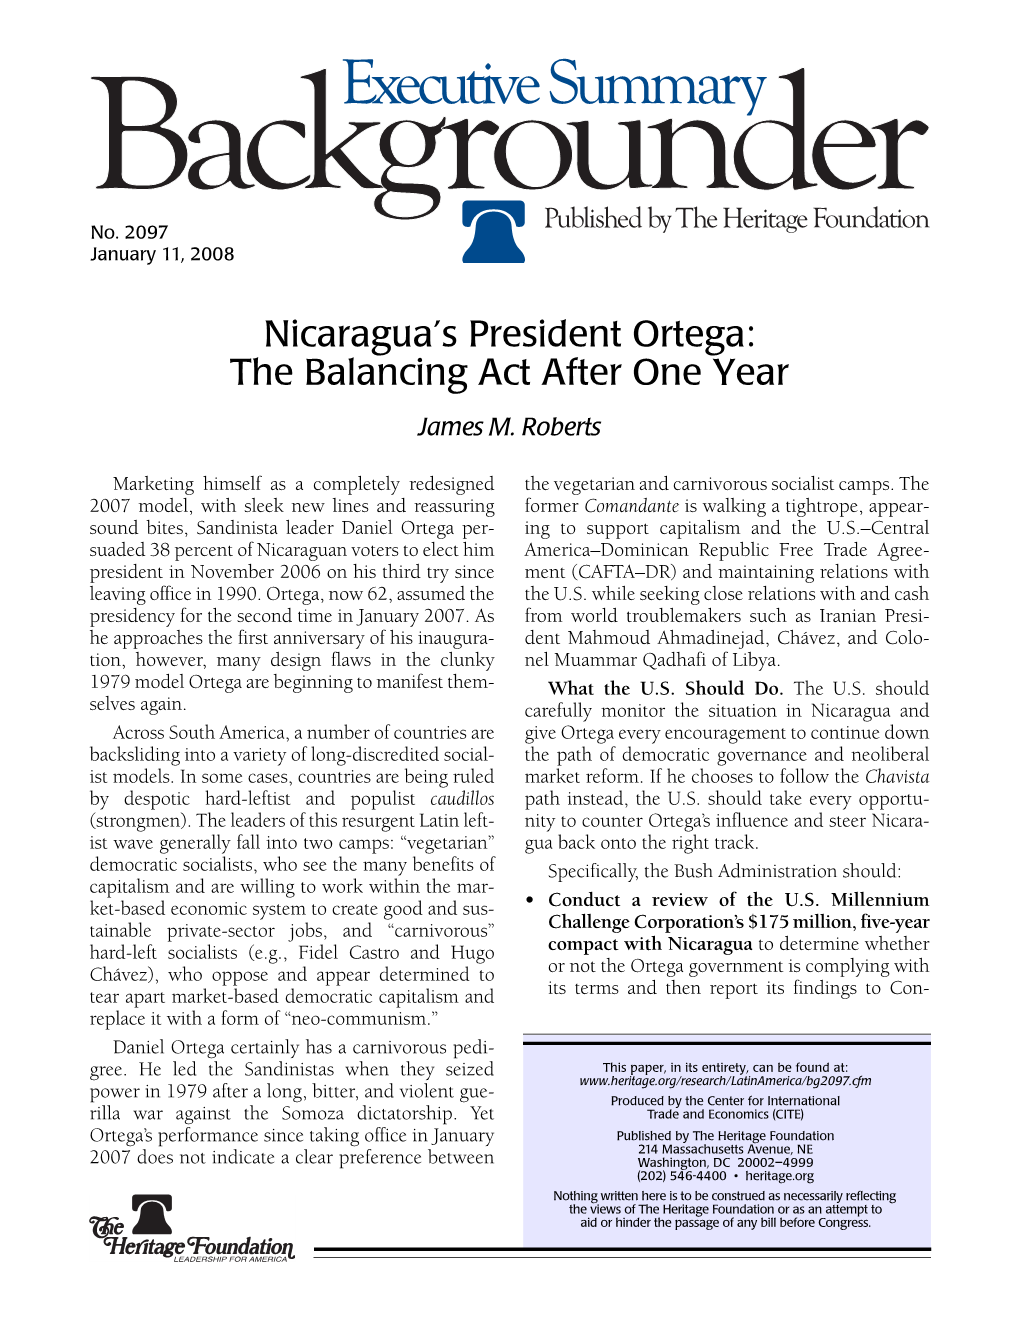 Nicaragua's President Ortega: the Balancing Act After One Year